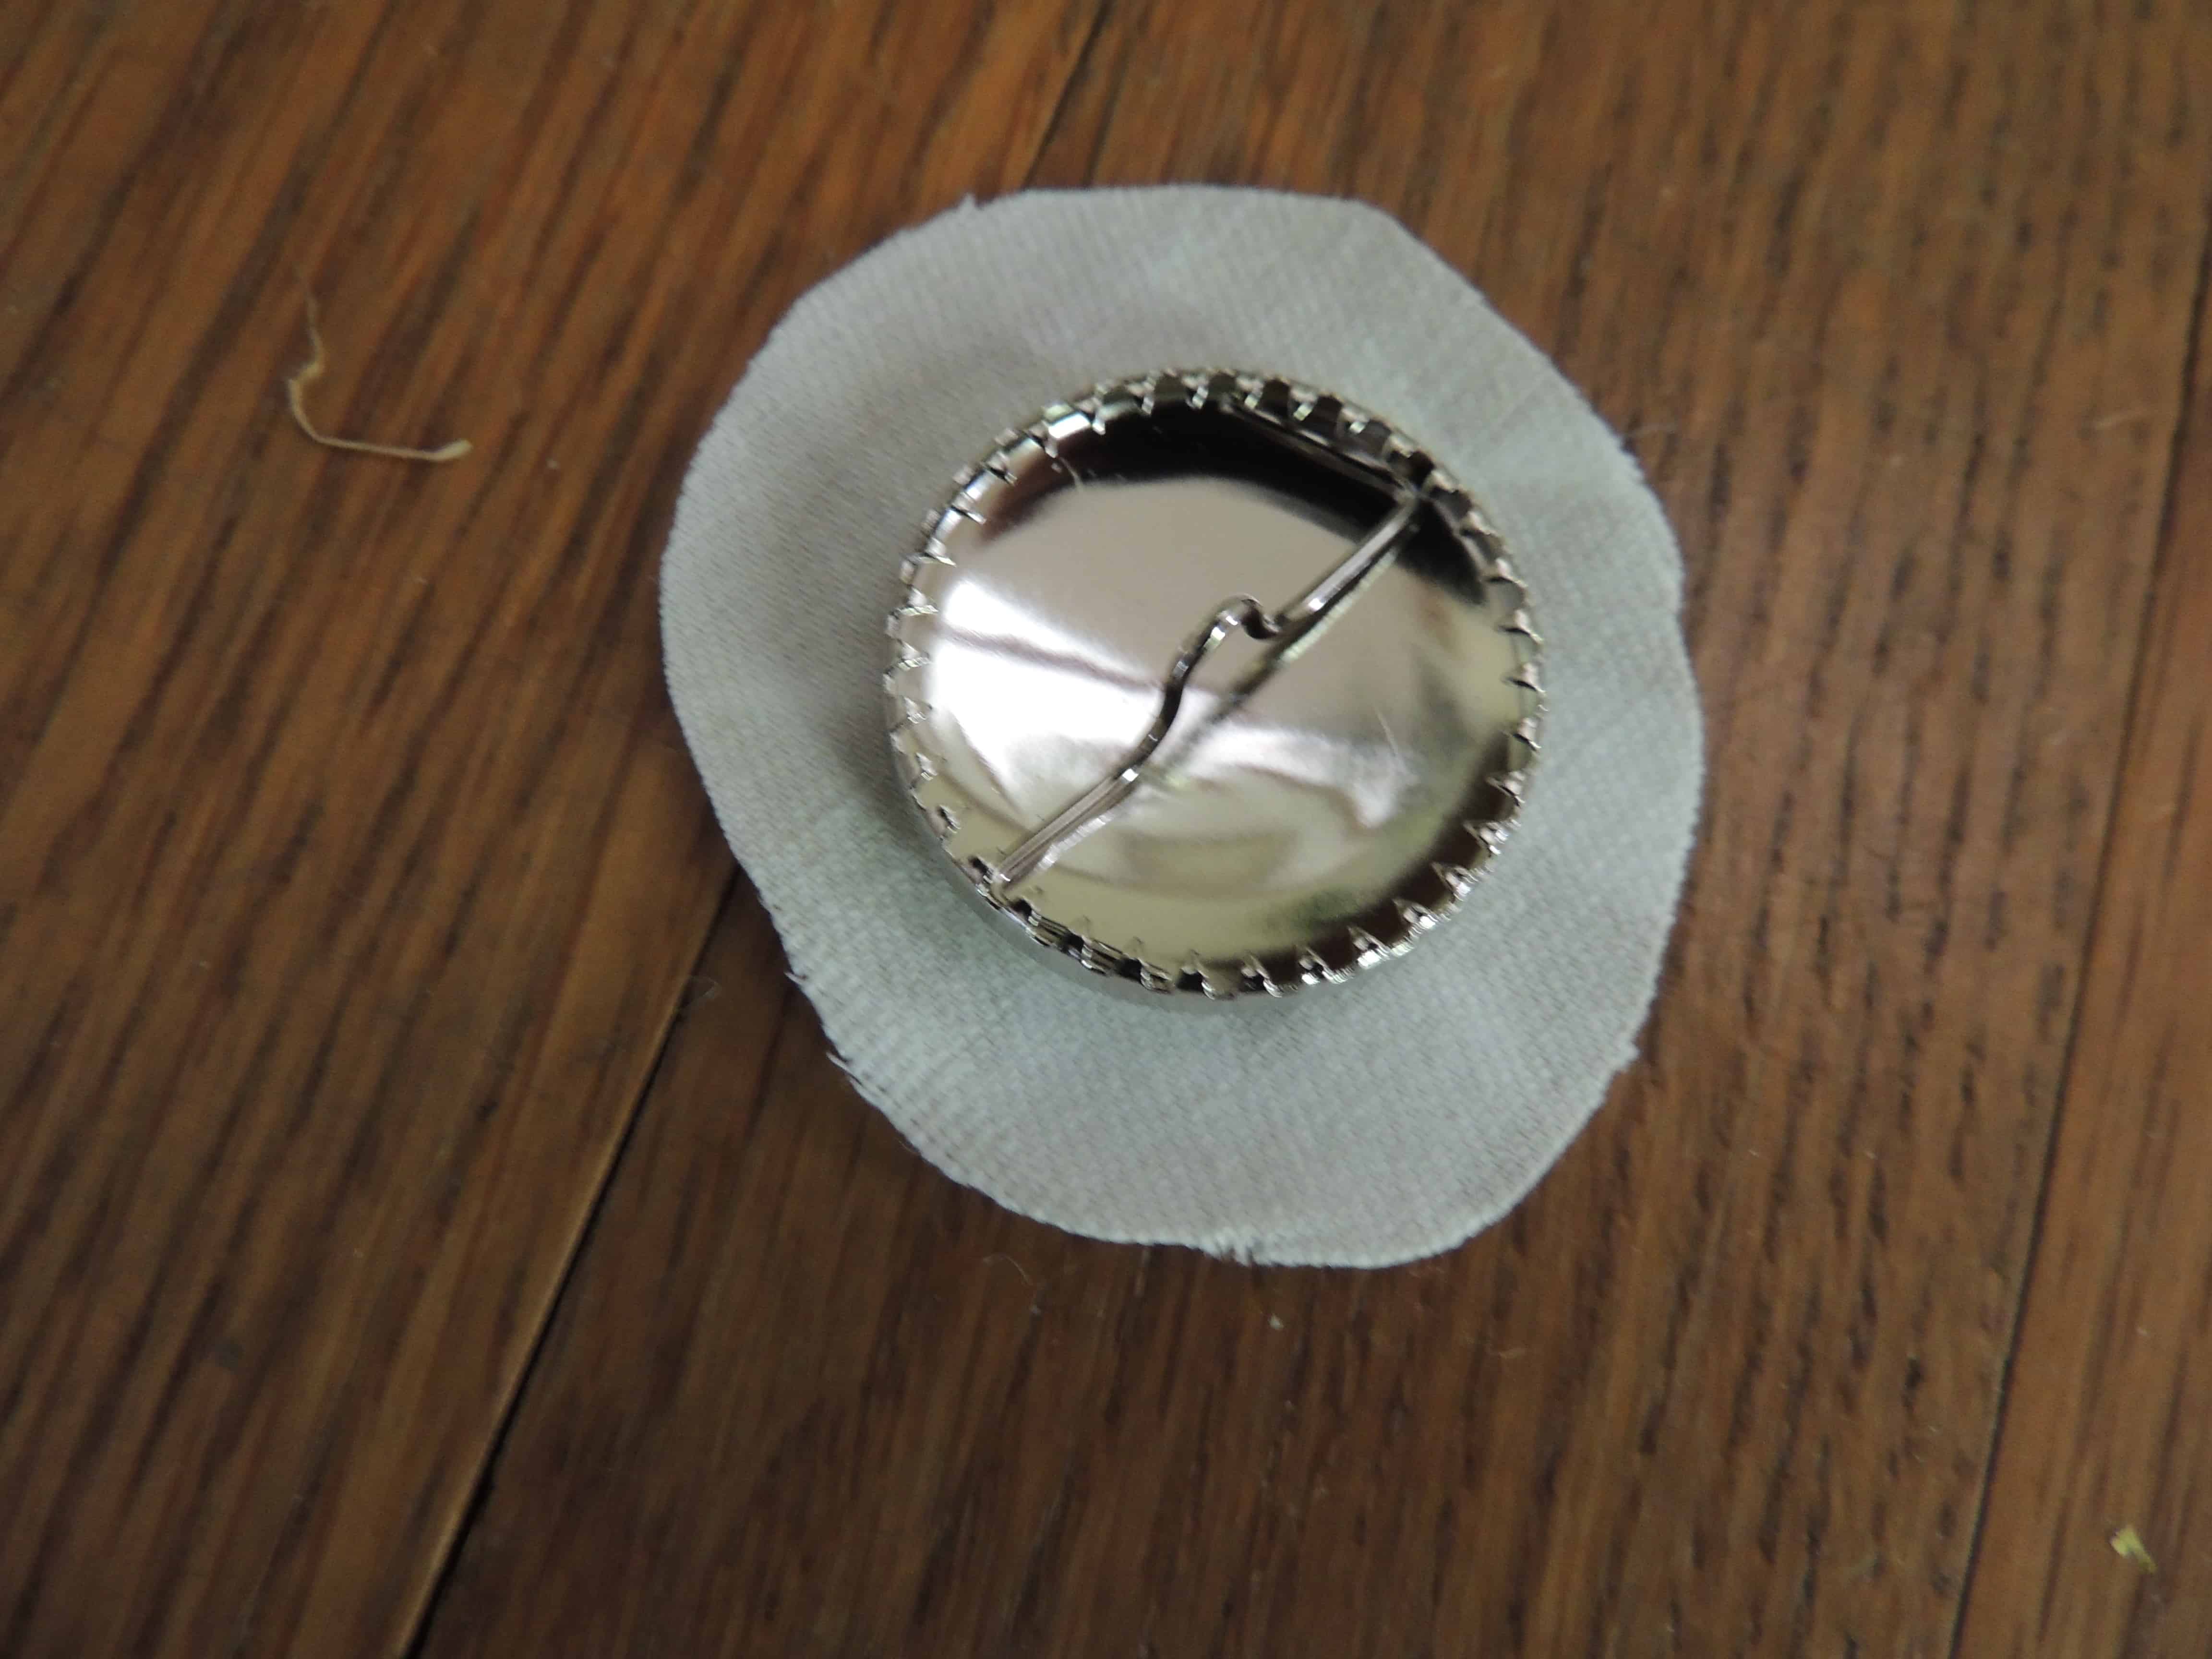 Use a small piece of fabric to cover the small button